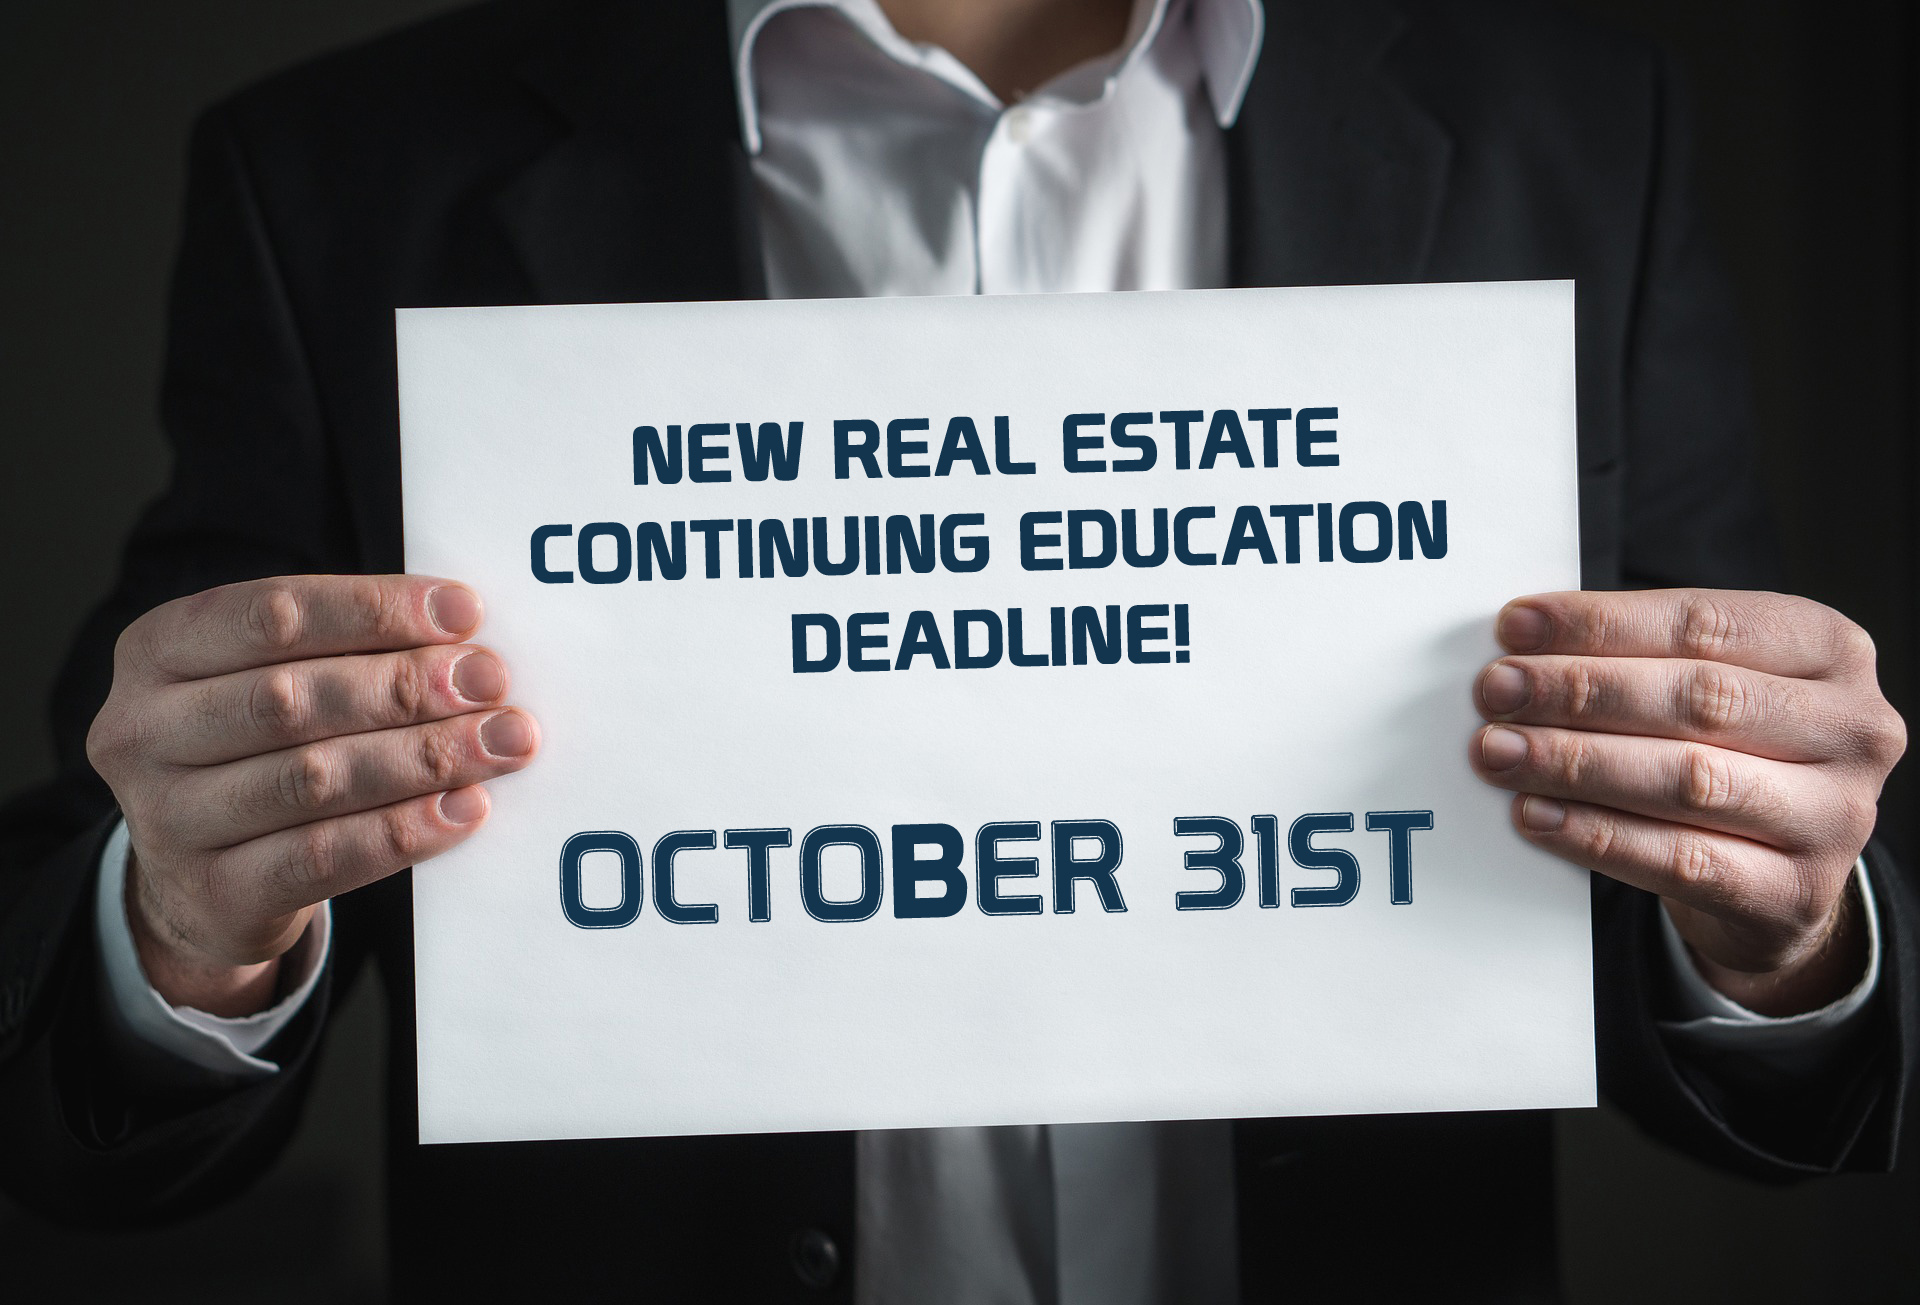 NEW DEADLINE (OCT. 31)! – Real Estate Continuing Education